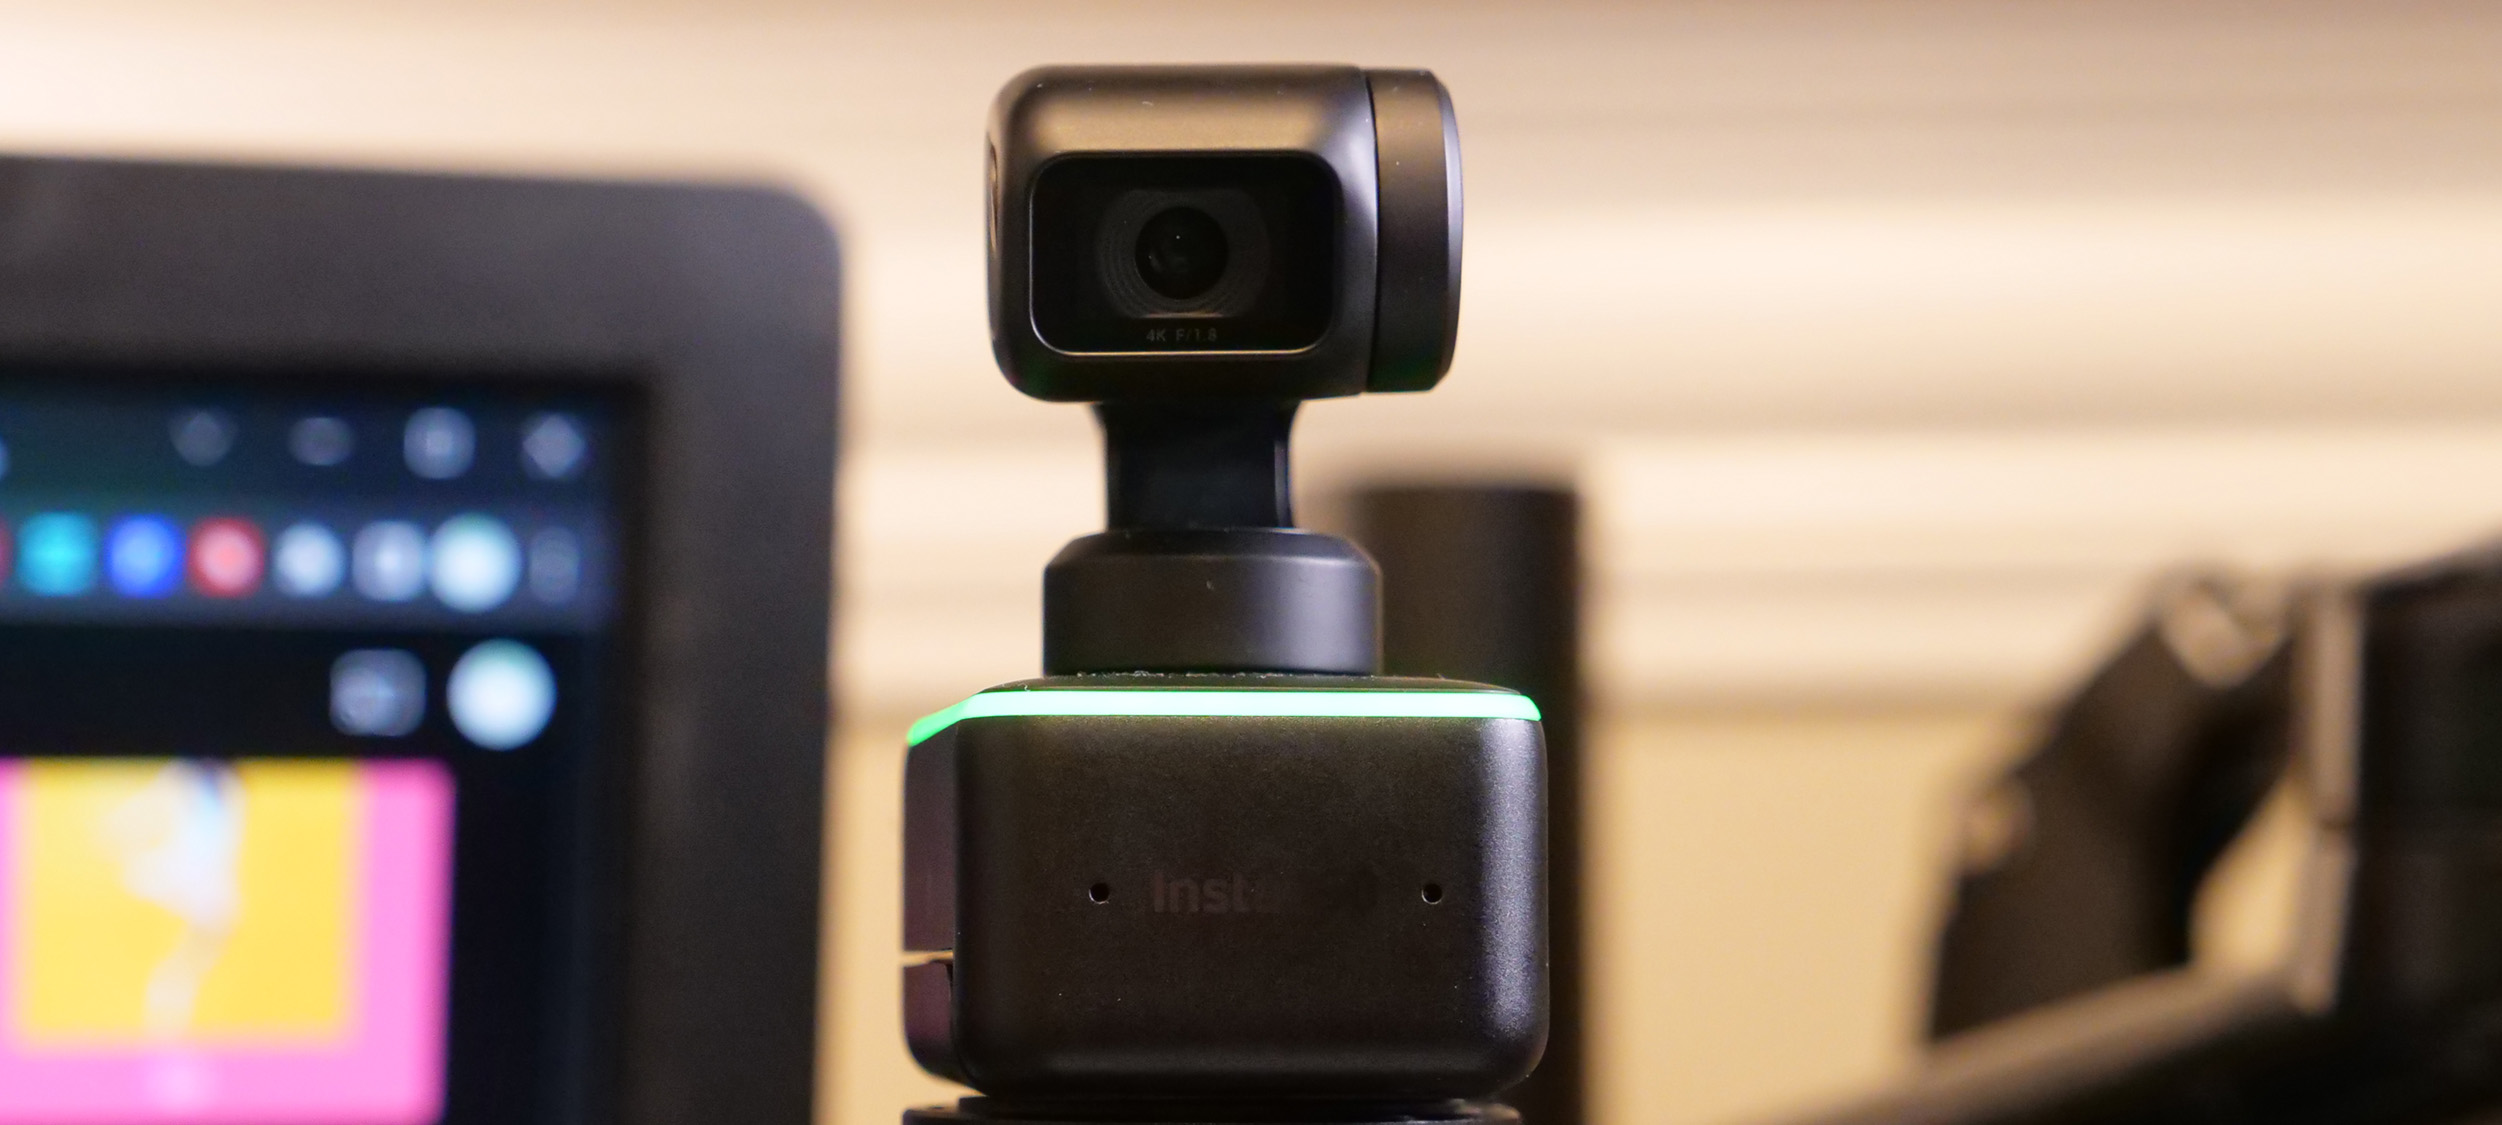 Insta360 Link webcam review: Mag | Laptop Astounding and innovation image